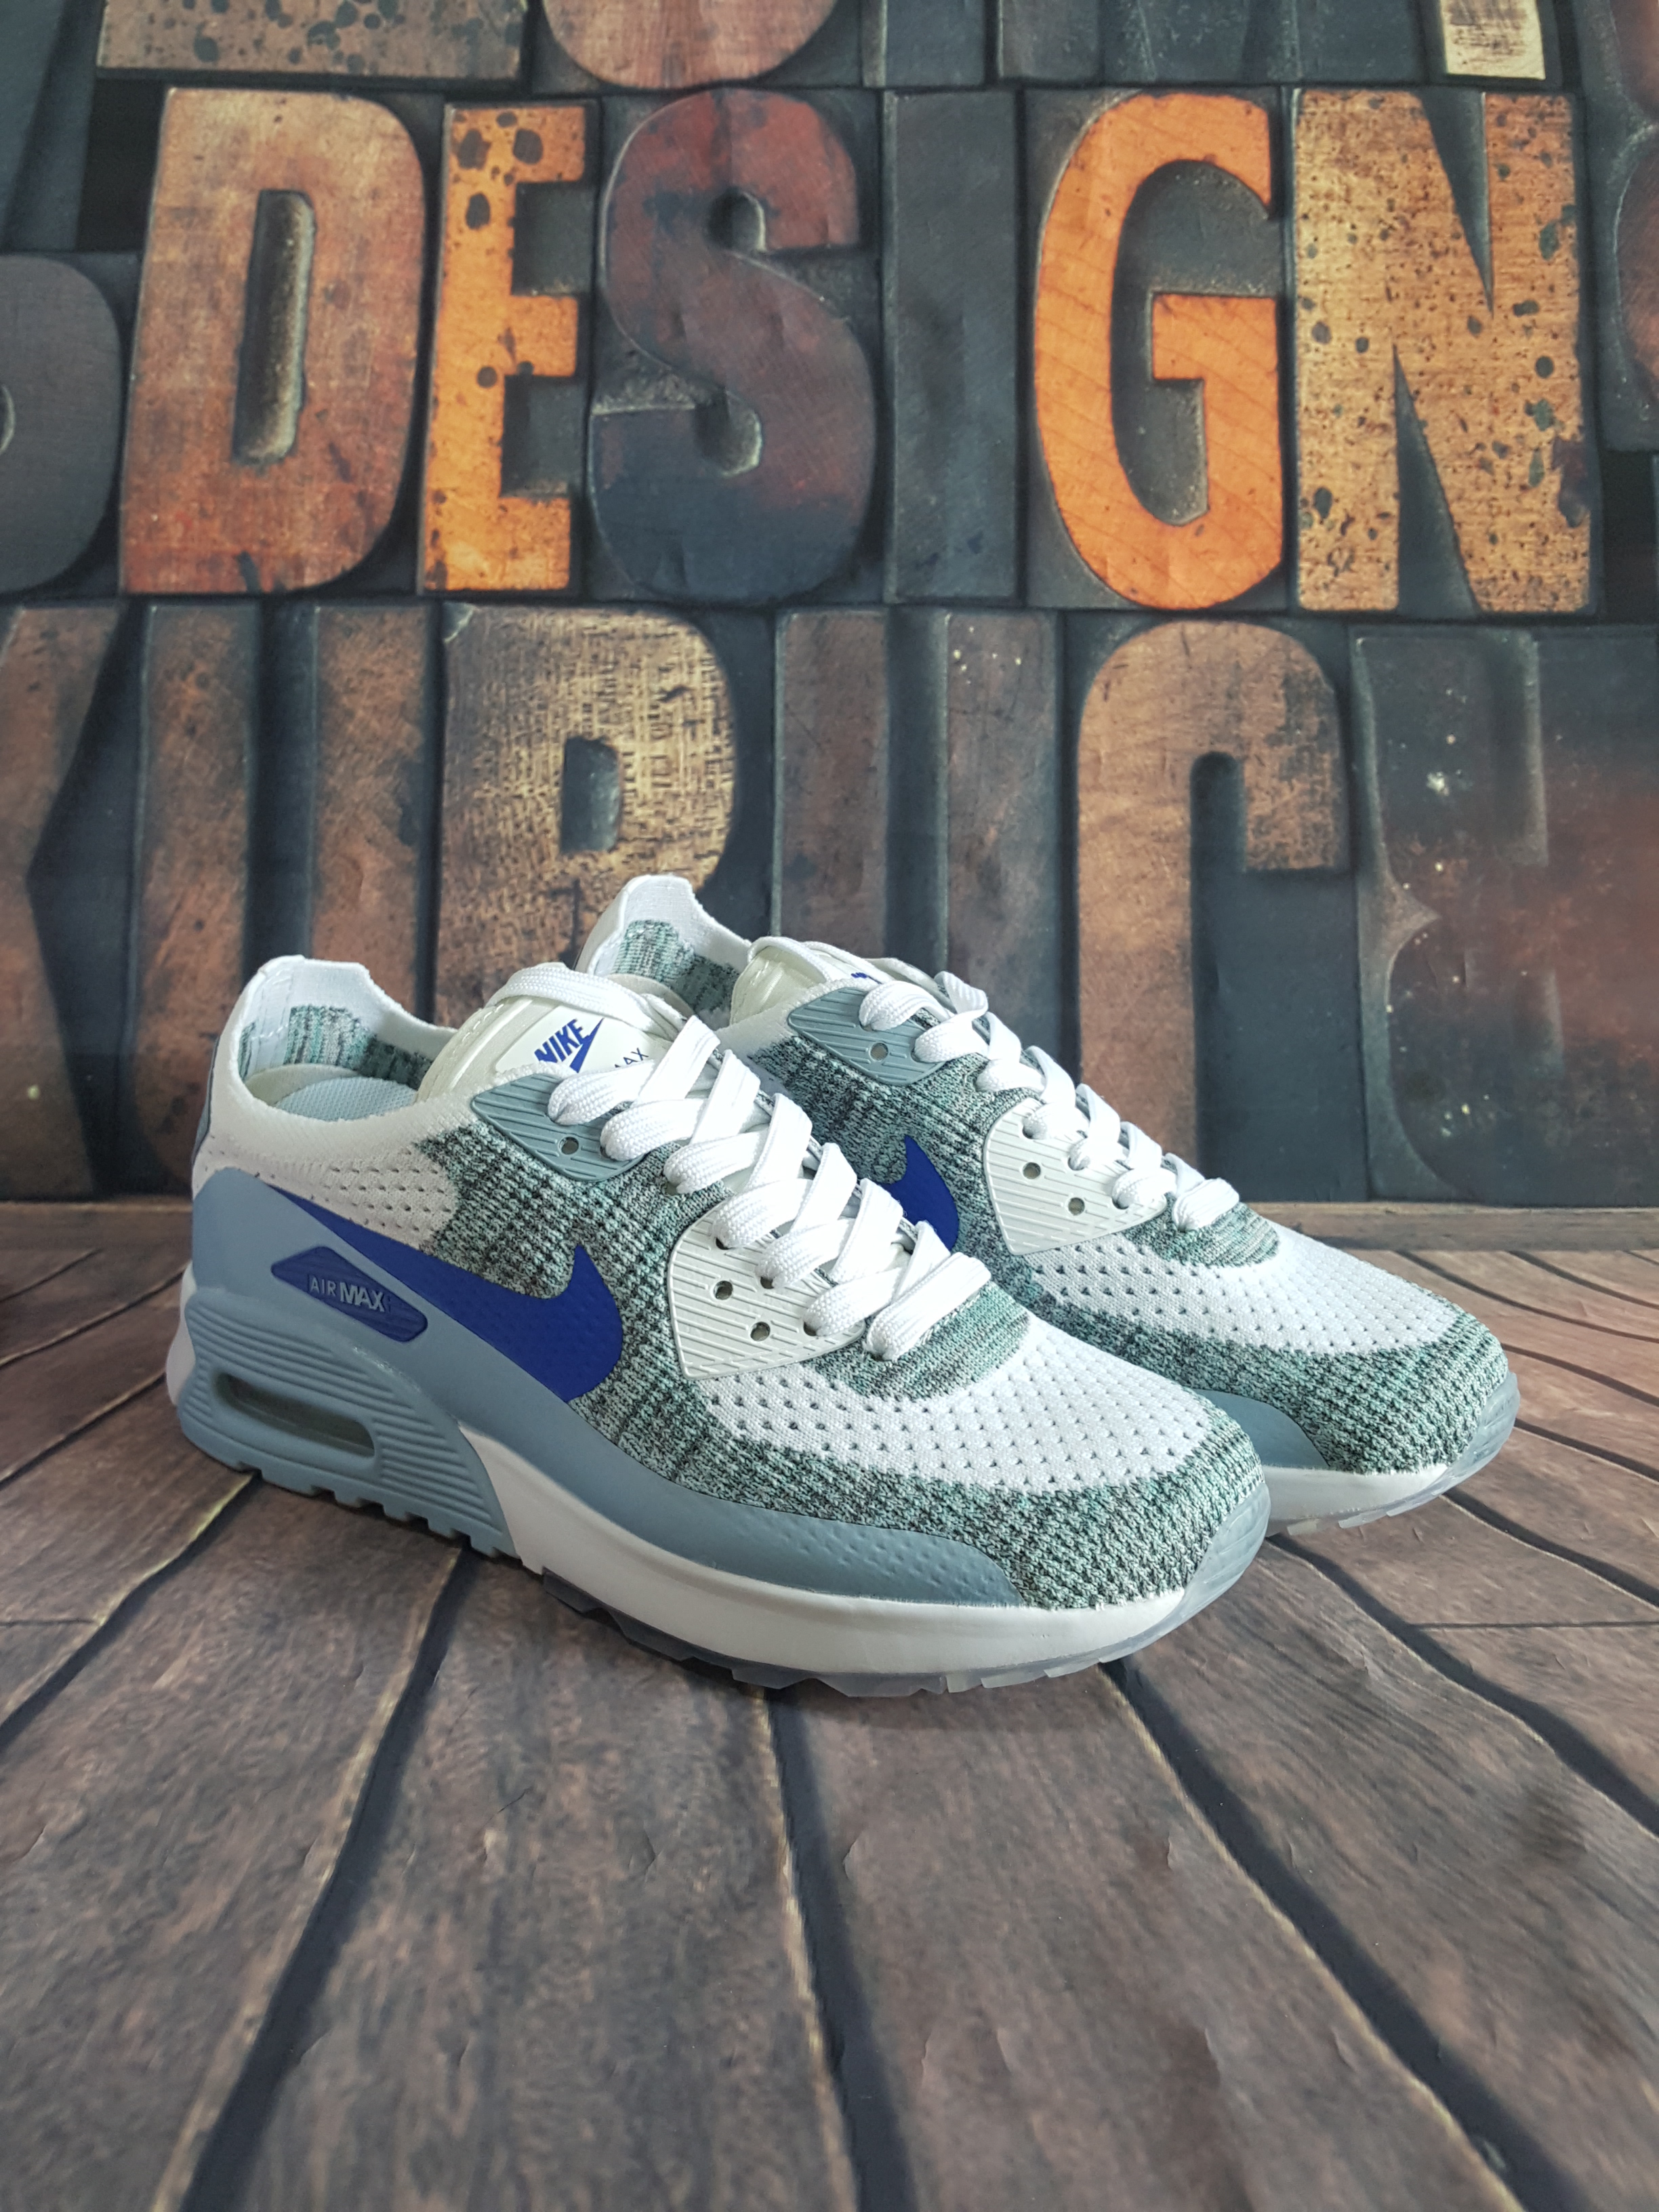 Nike Air Max 90 Flyknit White Grey Blue Shoes